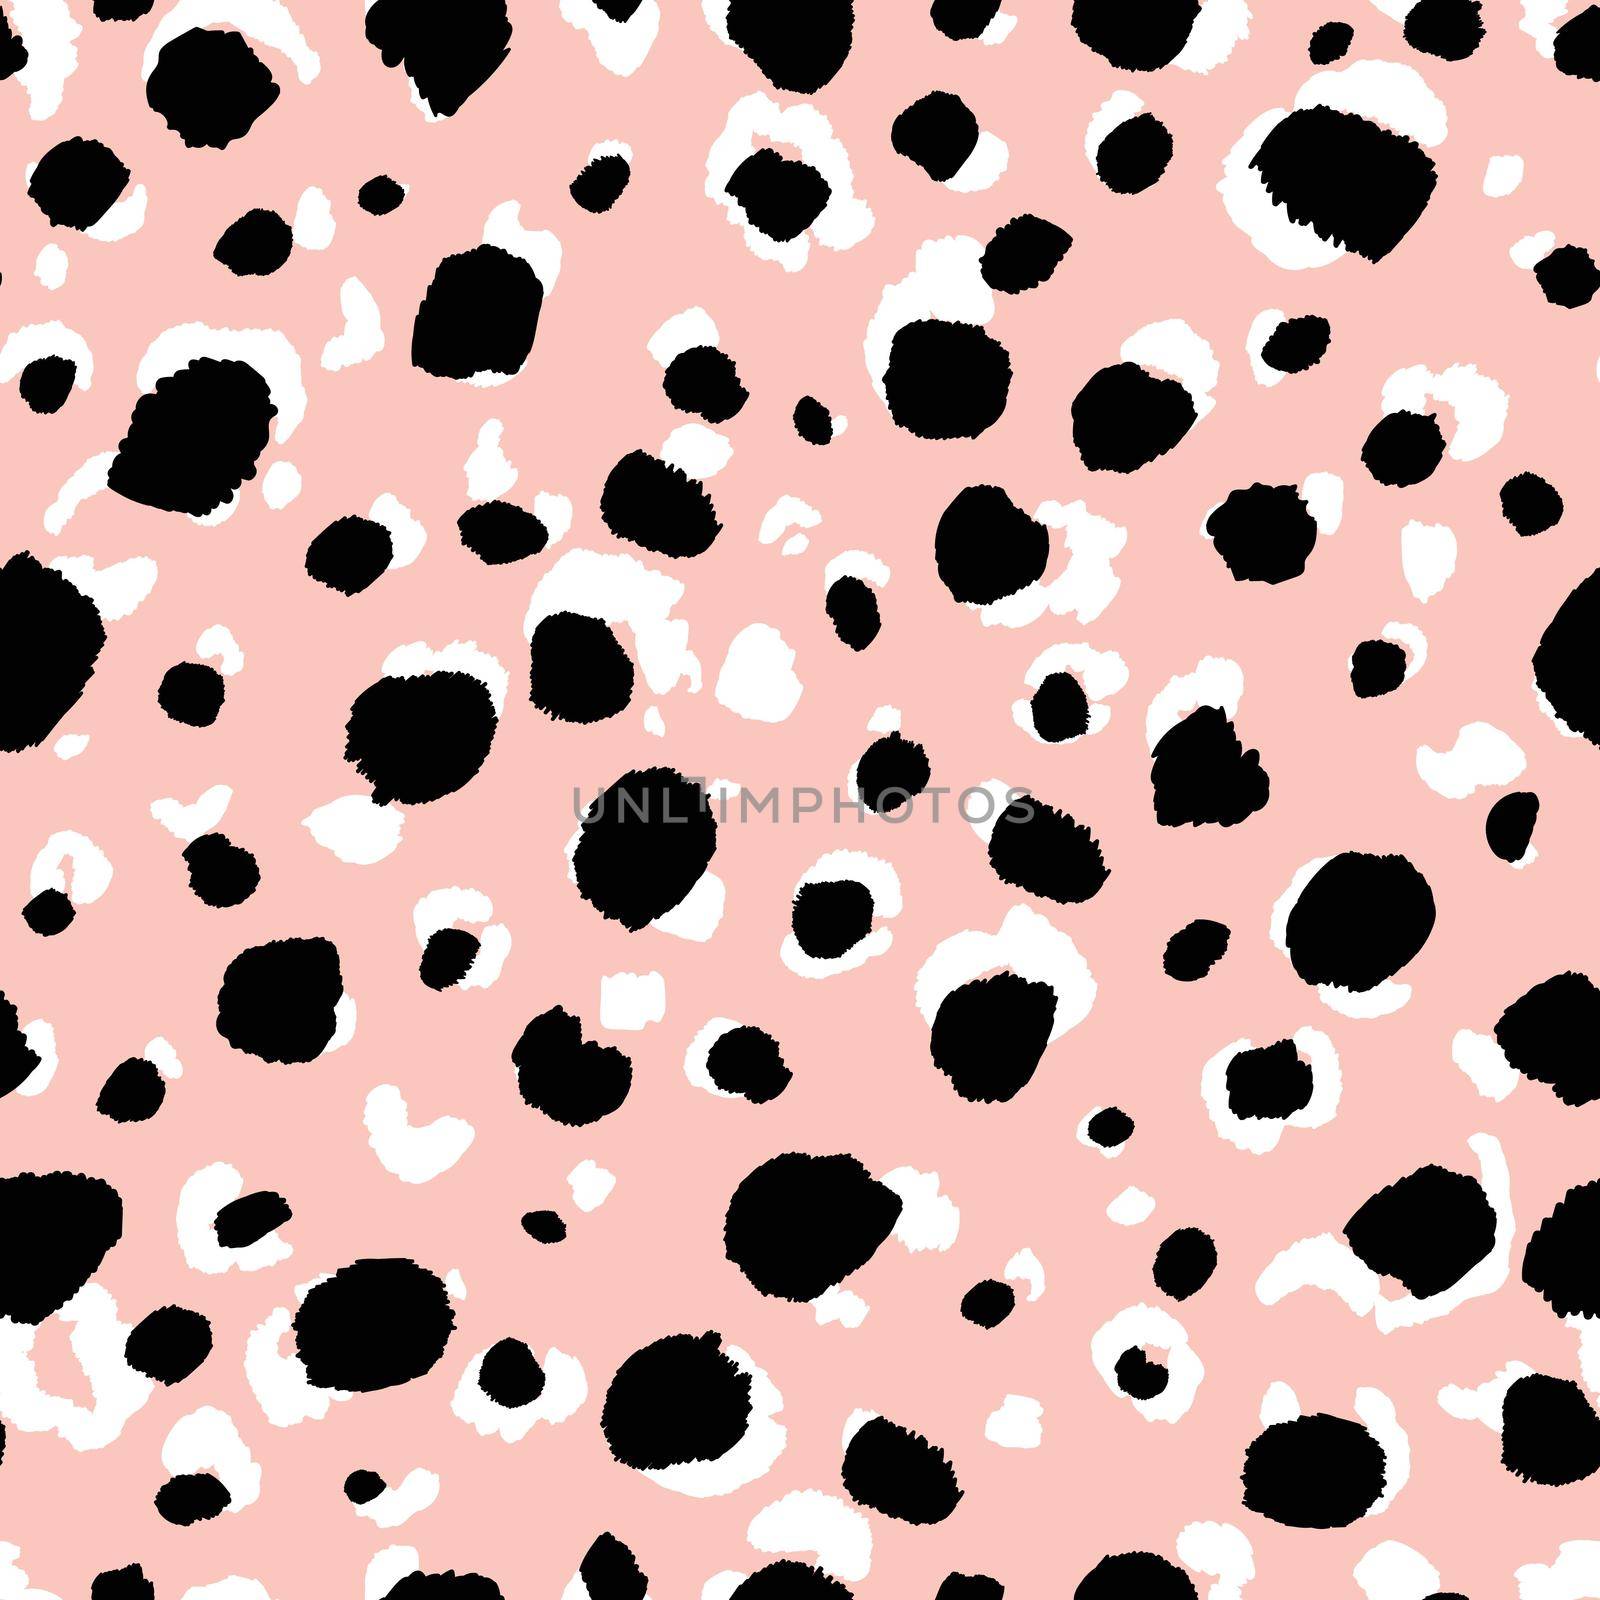 Abstract modern leopard seamless pattern. Animals trendy background. Beige and black decorative vector stock illustration for print, card, postcard, fabric, textile. Modern ornament of stylized skin by allaku